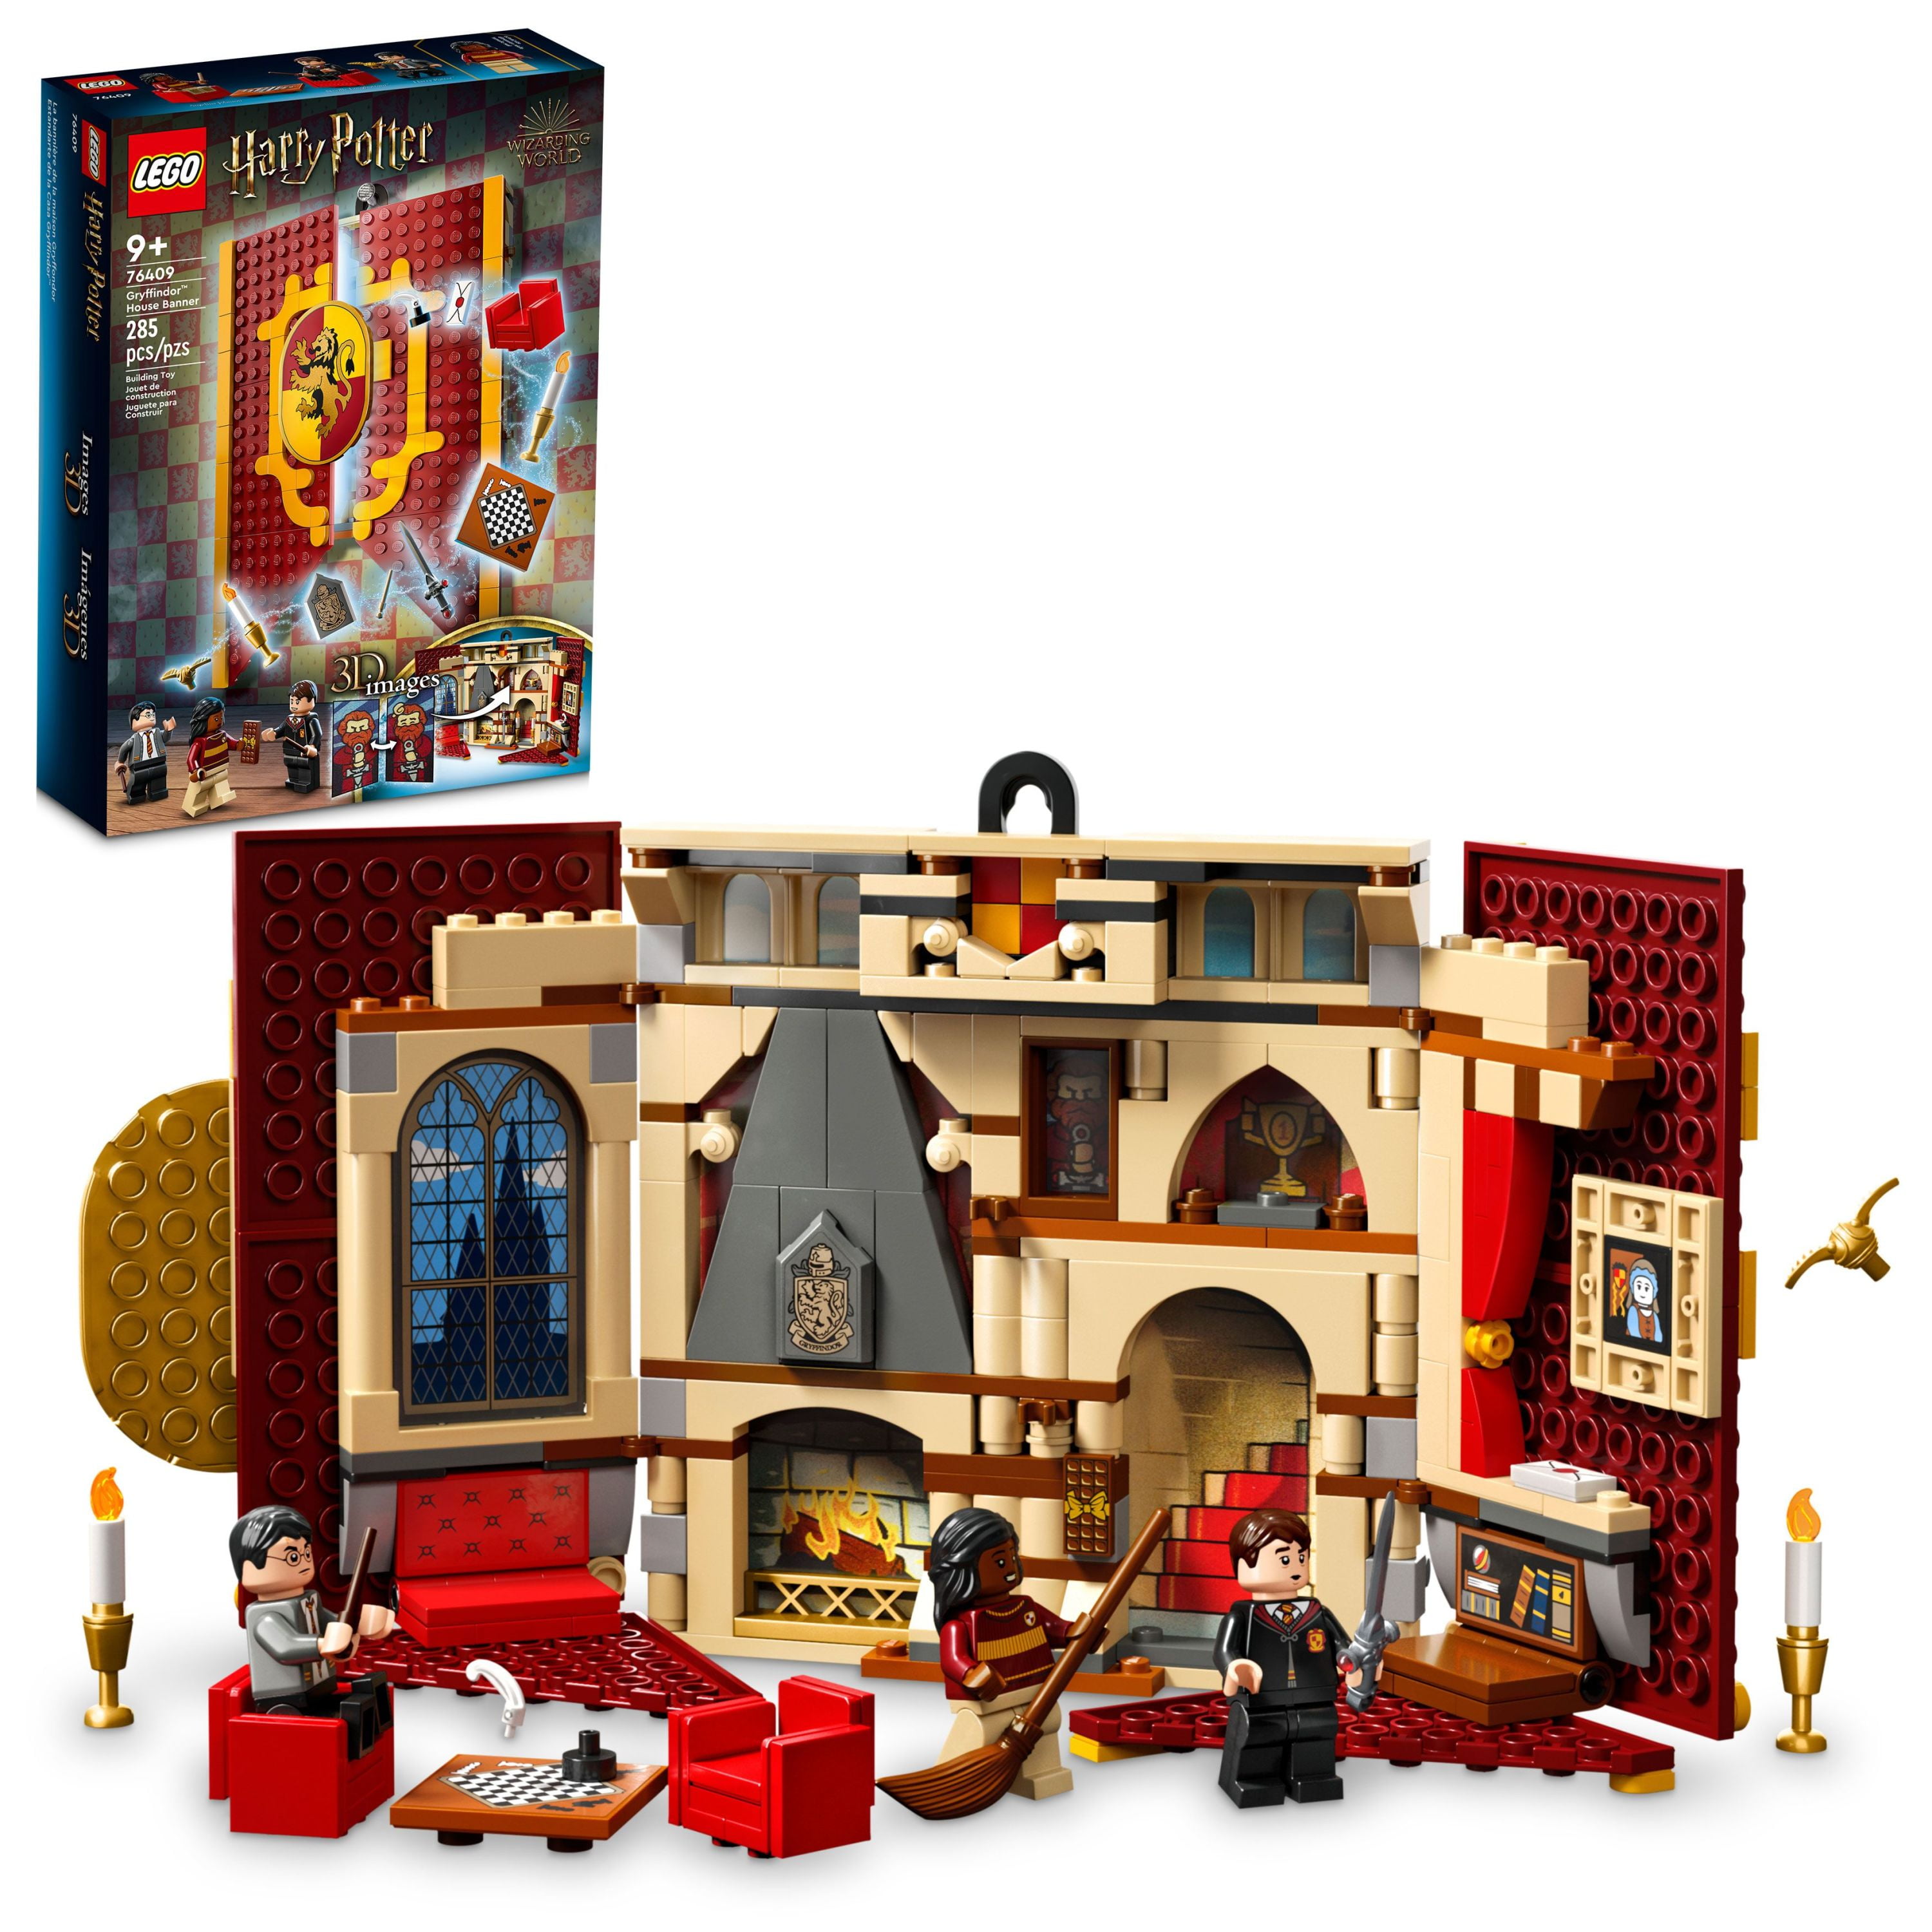 LEGO Harry Potter Gryffindor House Banner Set 76409, Hogwarts Castle Common Room Toy or Wall Display, Fold Up Travel Toy, Collectible with 3 Minifigures